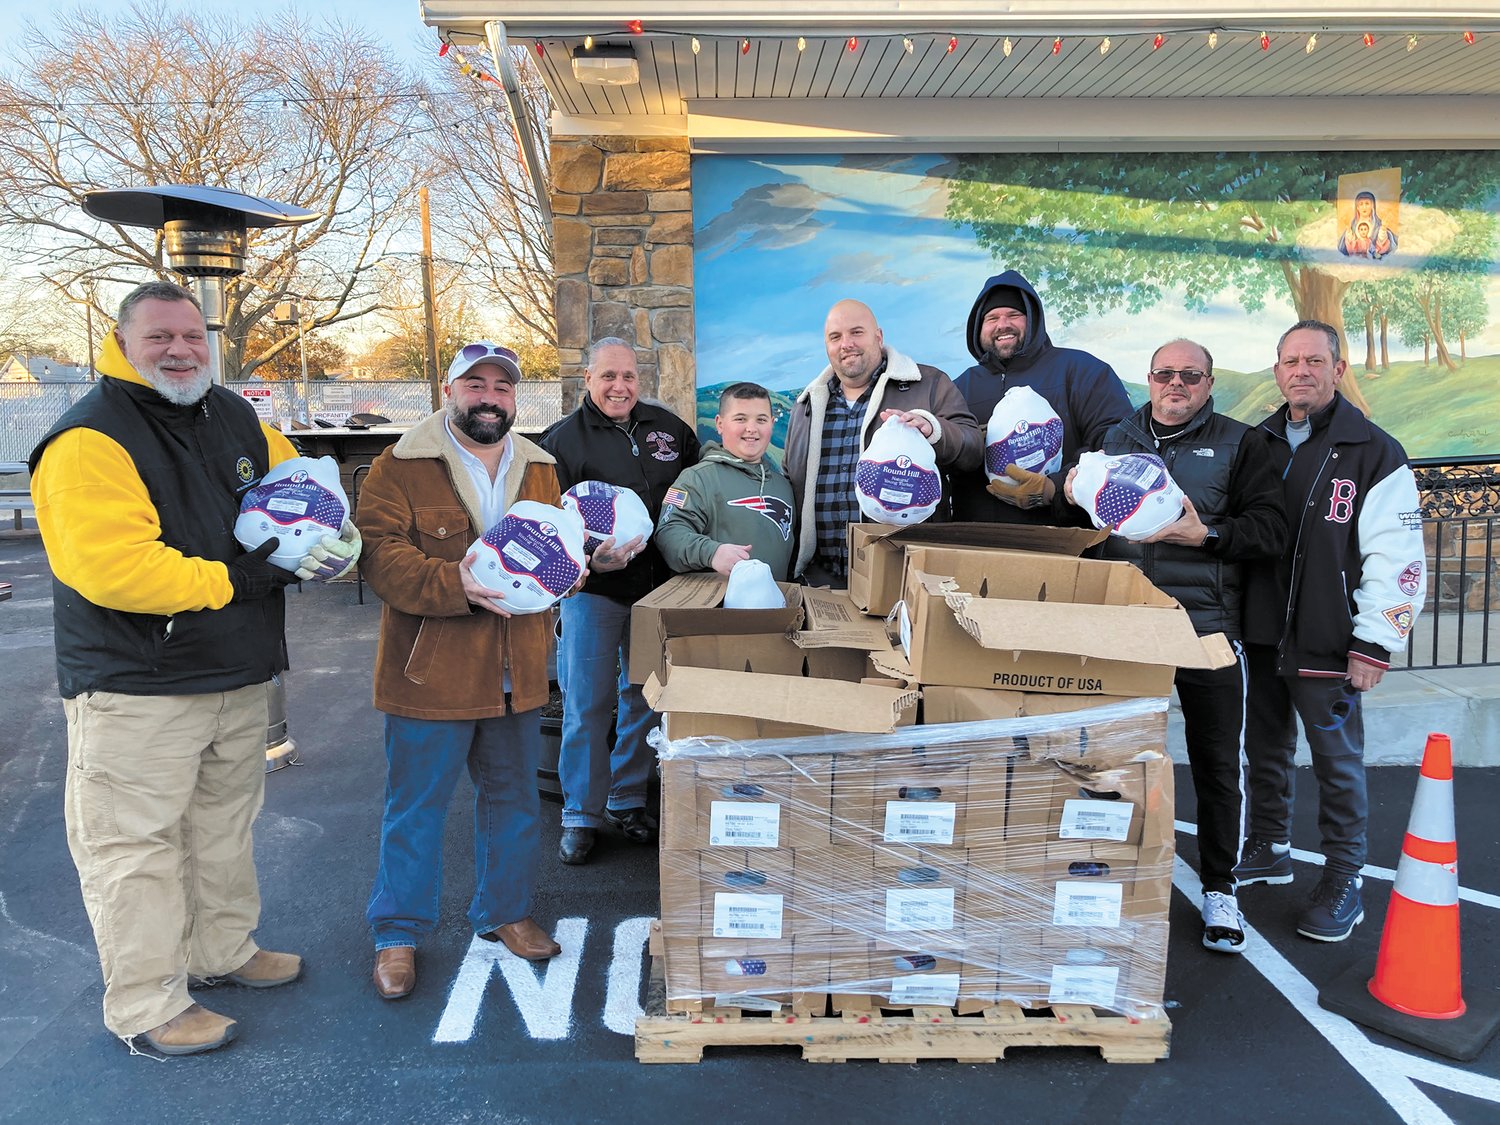 THEY’RE ALL FROZEN: Volunteers handed out frozen turkeys outside St. May’s Feast Society Monday afternoon. (From left) Brian Aschettino, St. Mary’s Feast Society Vice President Ryan Nardolillo, Joe Traficante, Matthew Volpi Jr., St. Mary’s Feast Society President Matthew Volpi Sr., Ward 5 Councilman Chris Paplauskas, Bobby Battista and John Stravato. (Herald photo)